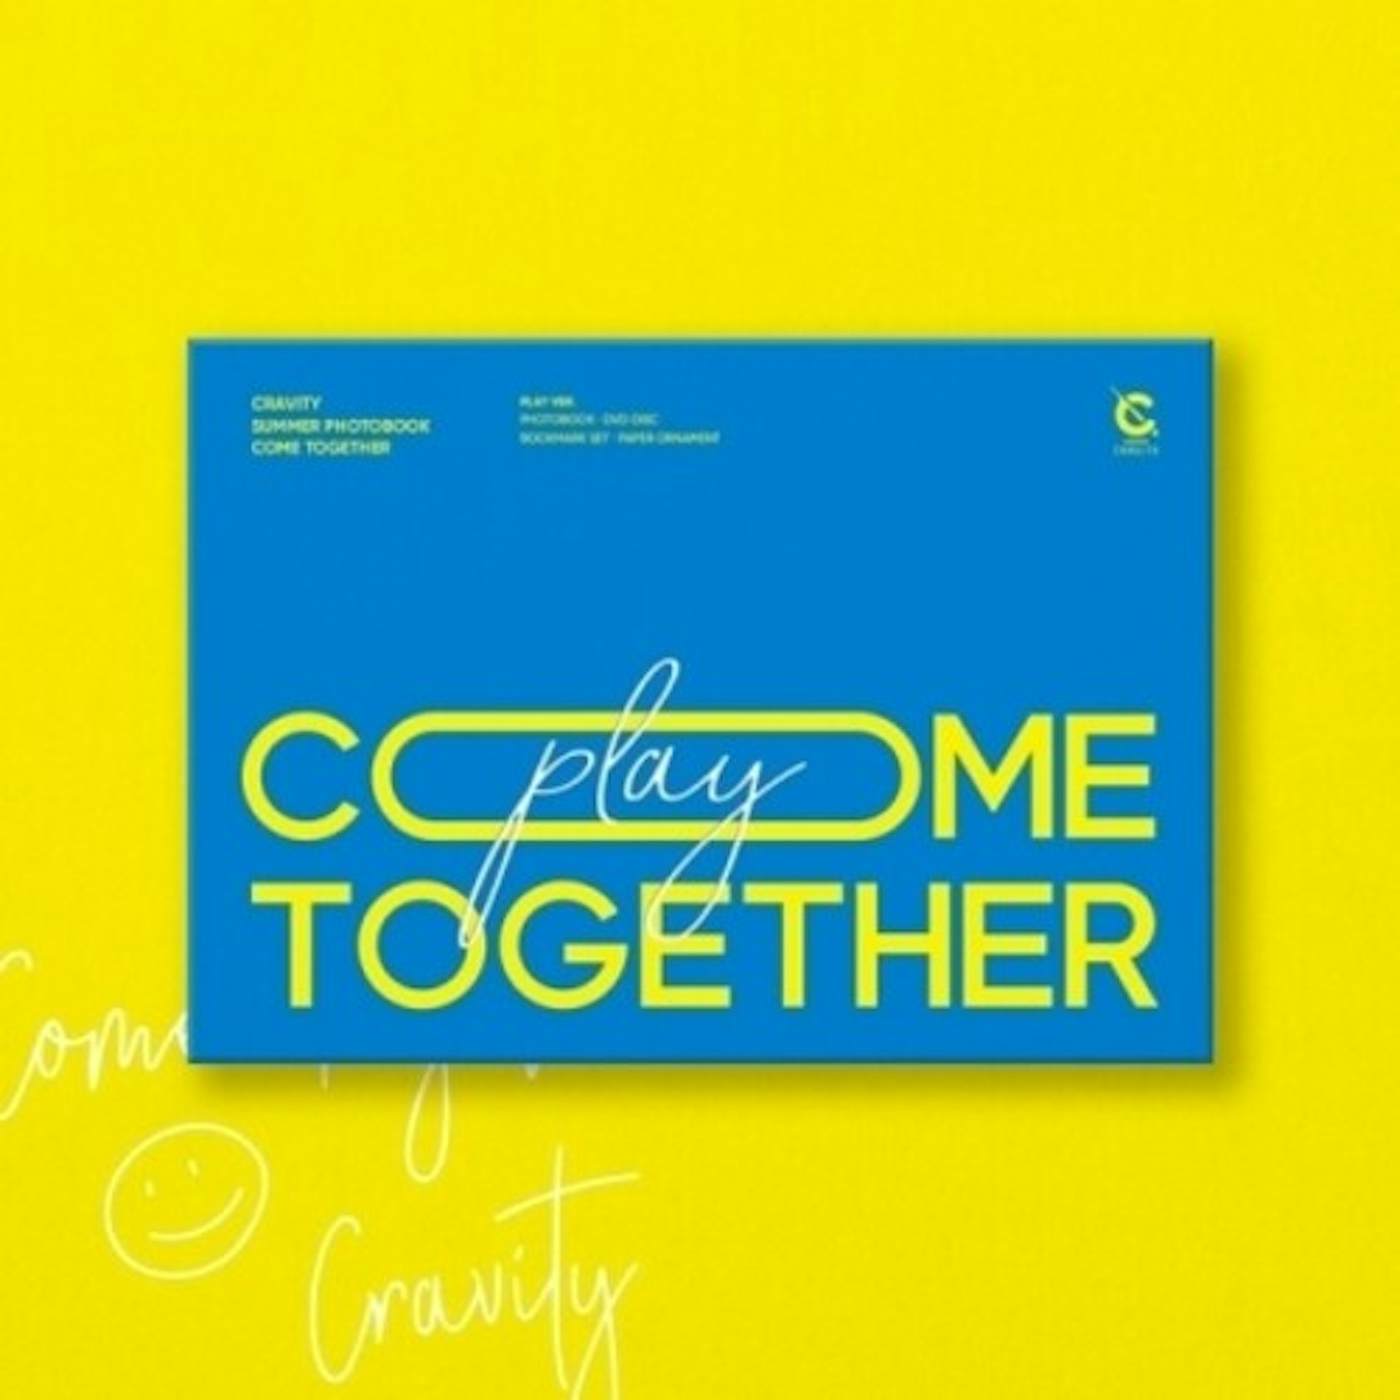 CRAVITY SUMMER PHOTOBOOK: COME TOGETHER (PLAY) DVD